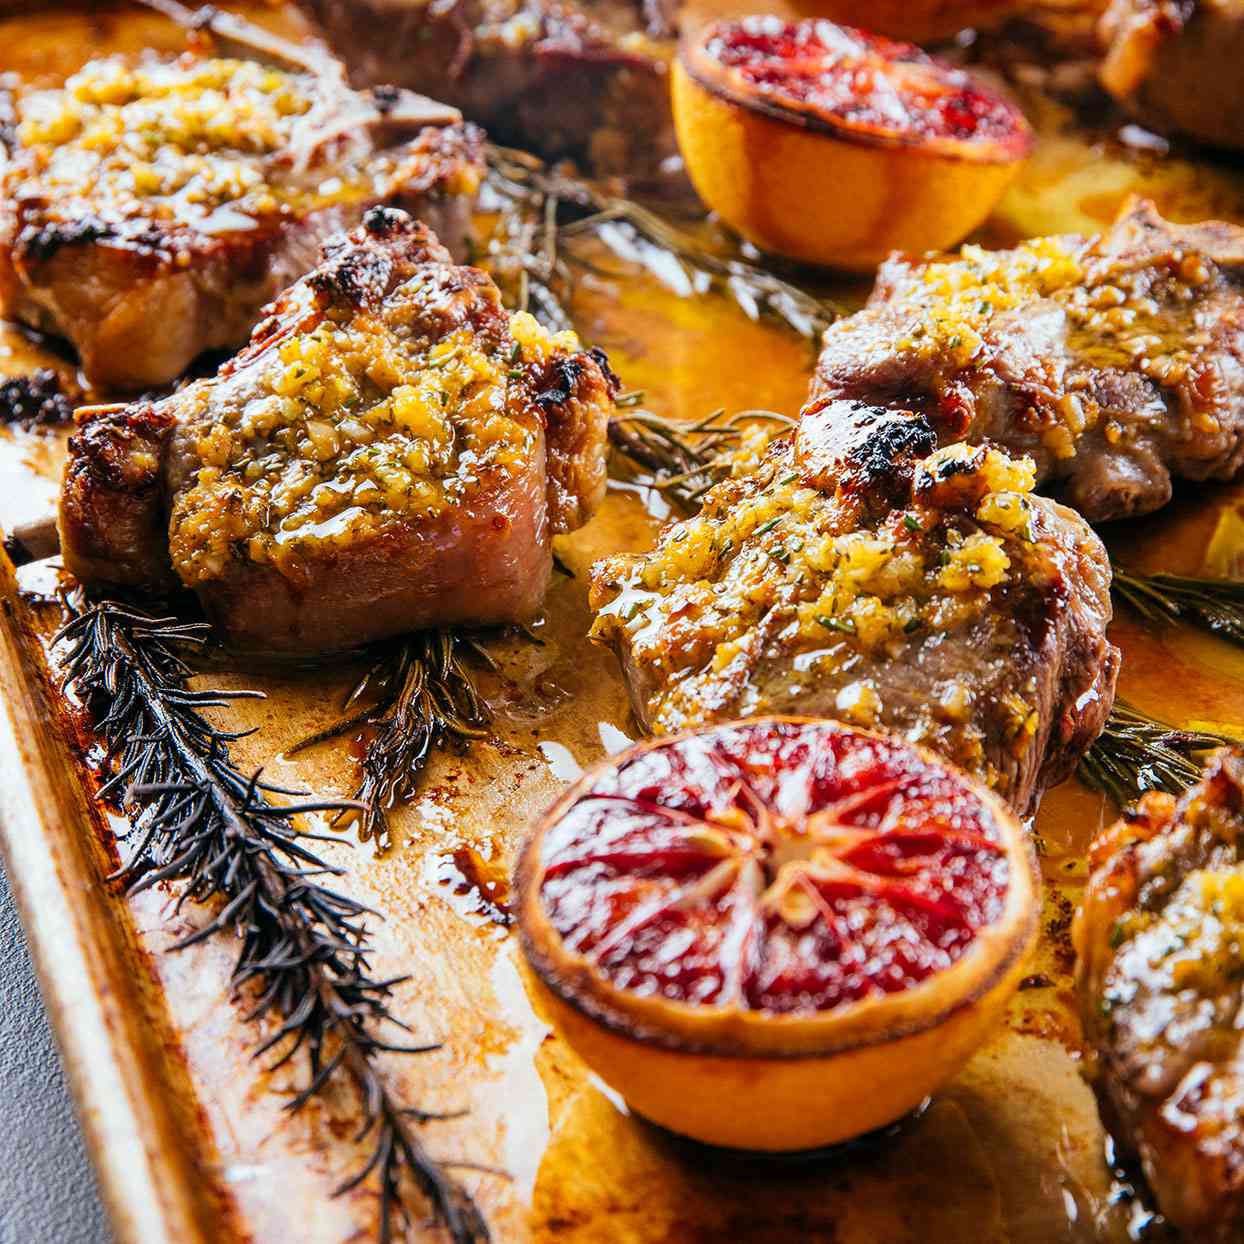 Broiled Lamb Chops with Charred Blood Oranges